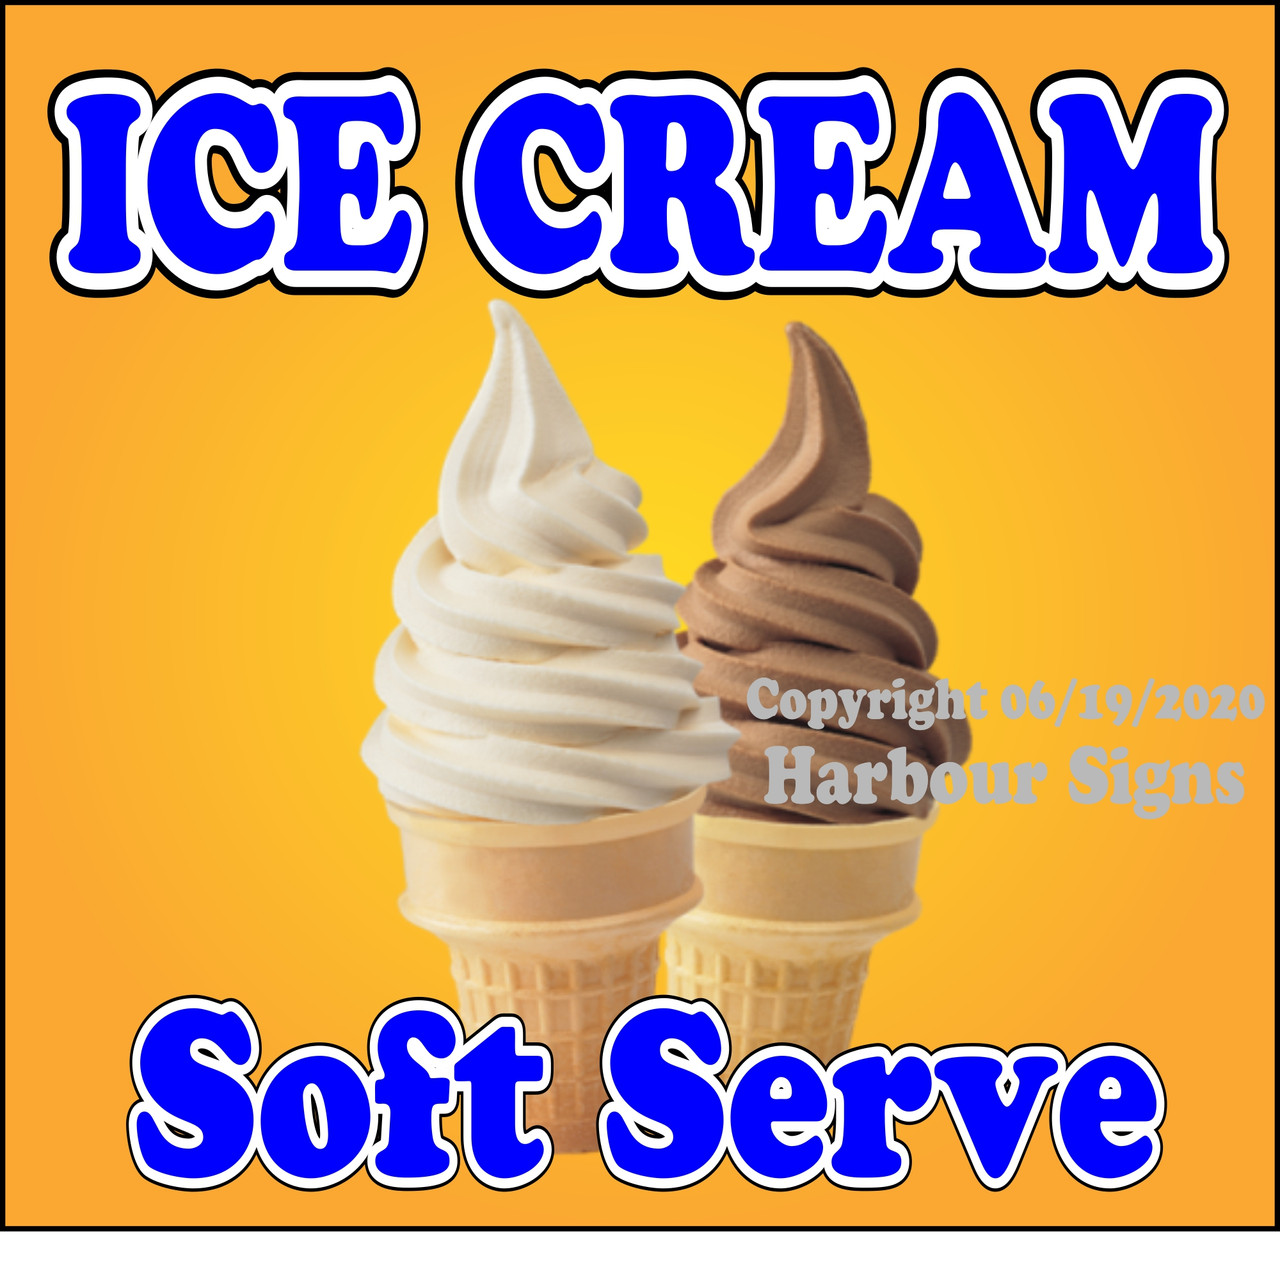 SOFT ICE CREAM Decal Sticker for Restaurant Delivery Shop Window Car Sign 